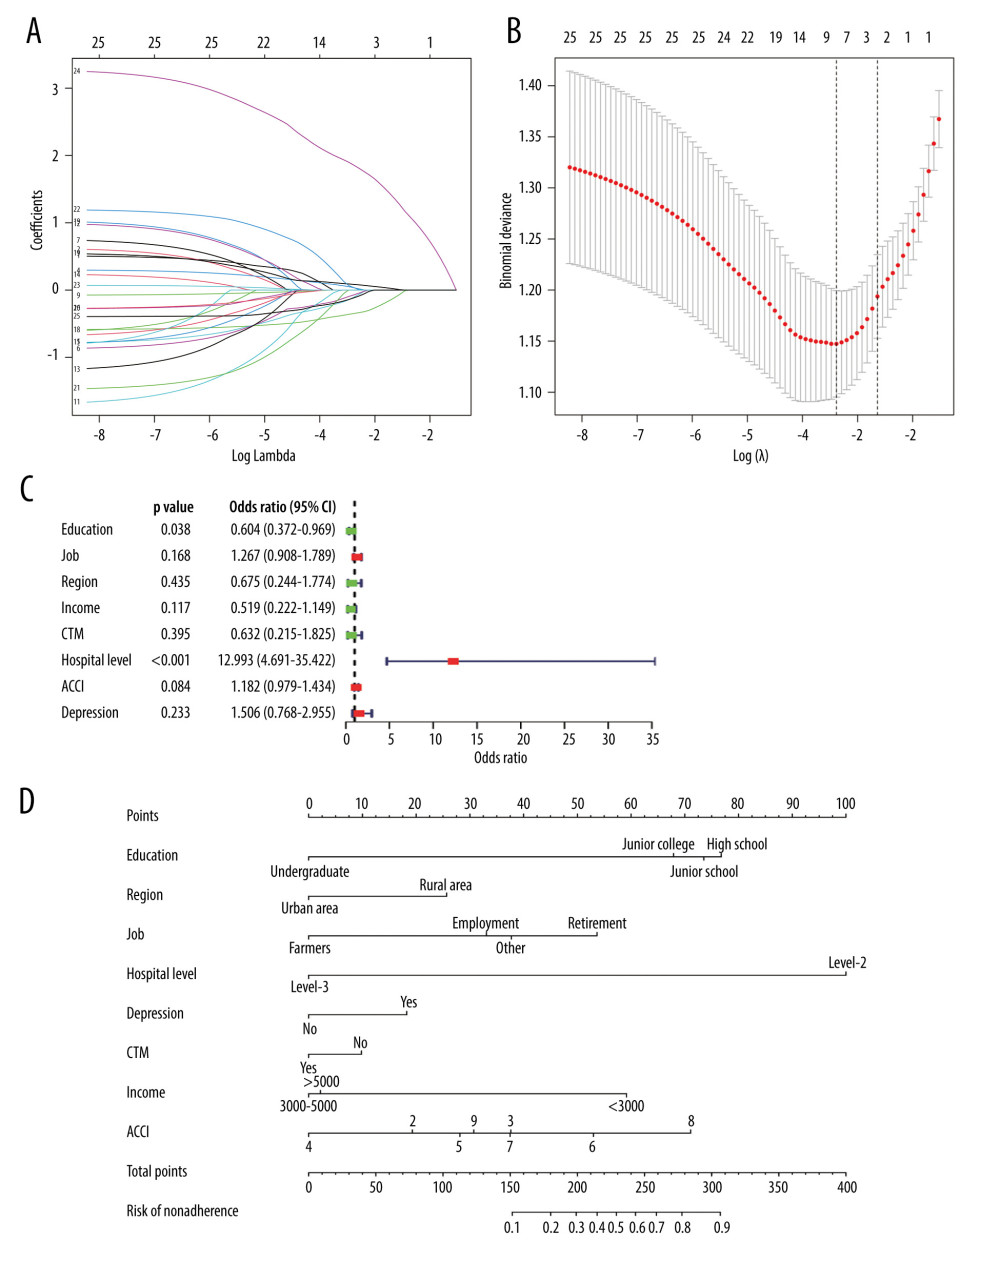 Prediction factors for medication nonadherence were selected, and a medication nonadherence nomogram was developed in hemodialysis patients. (A, B) Least absolute shrinkage and selection operator (LASSO) coefficient profiles of the 8 prediction factors. (C) Logistic regression analyses of the 8 prediction factors in hemodialysis patients. (D) Nomogram prediction of medication nonadherence in hemodialysis patients. (R software, version 4.0.3)